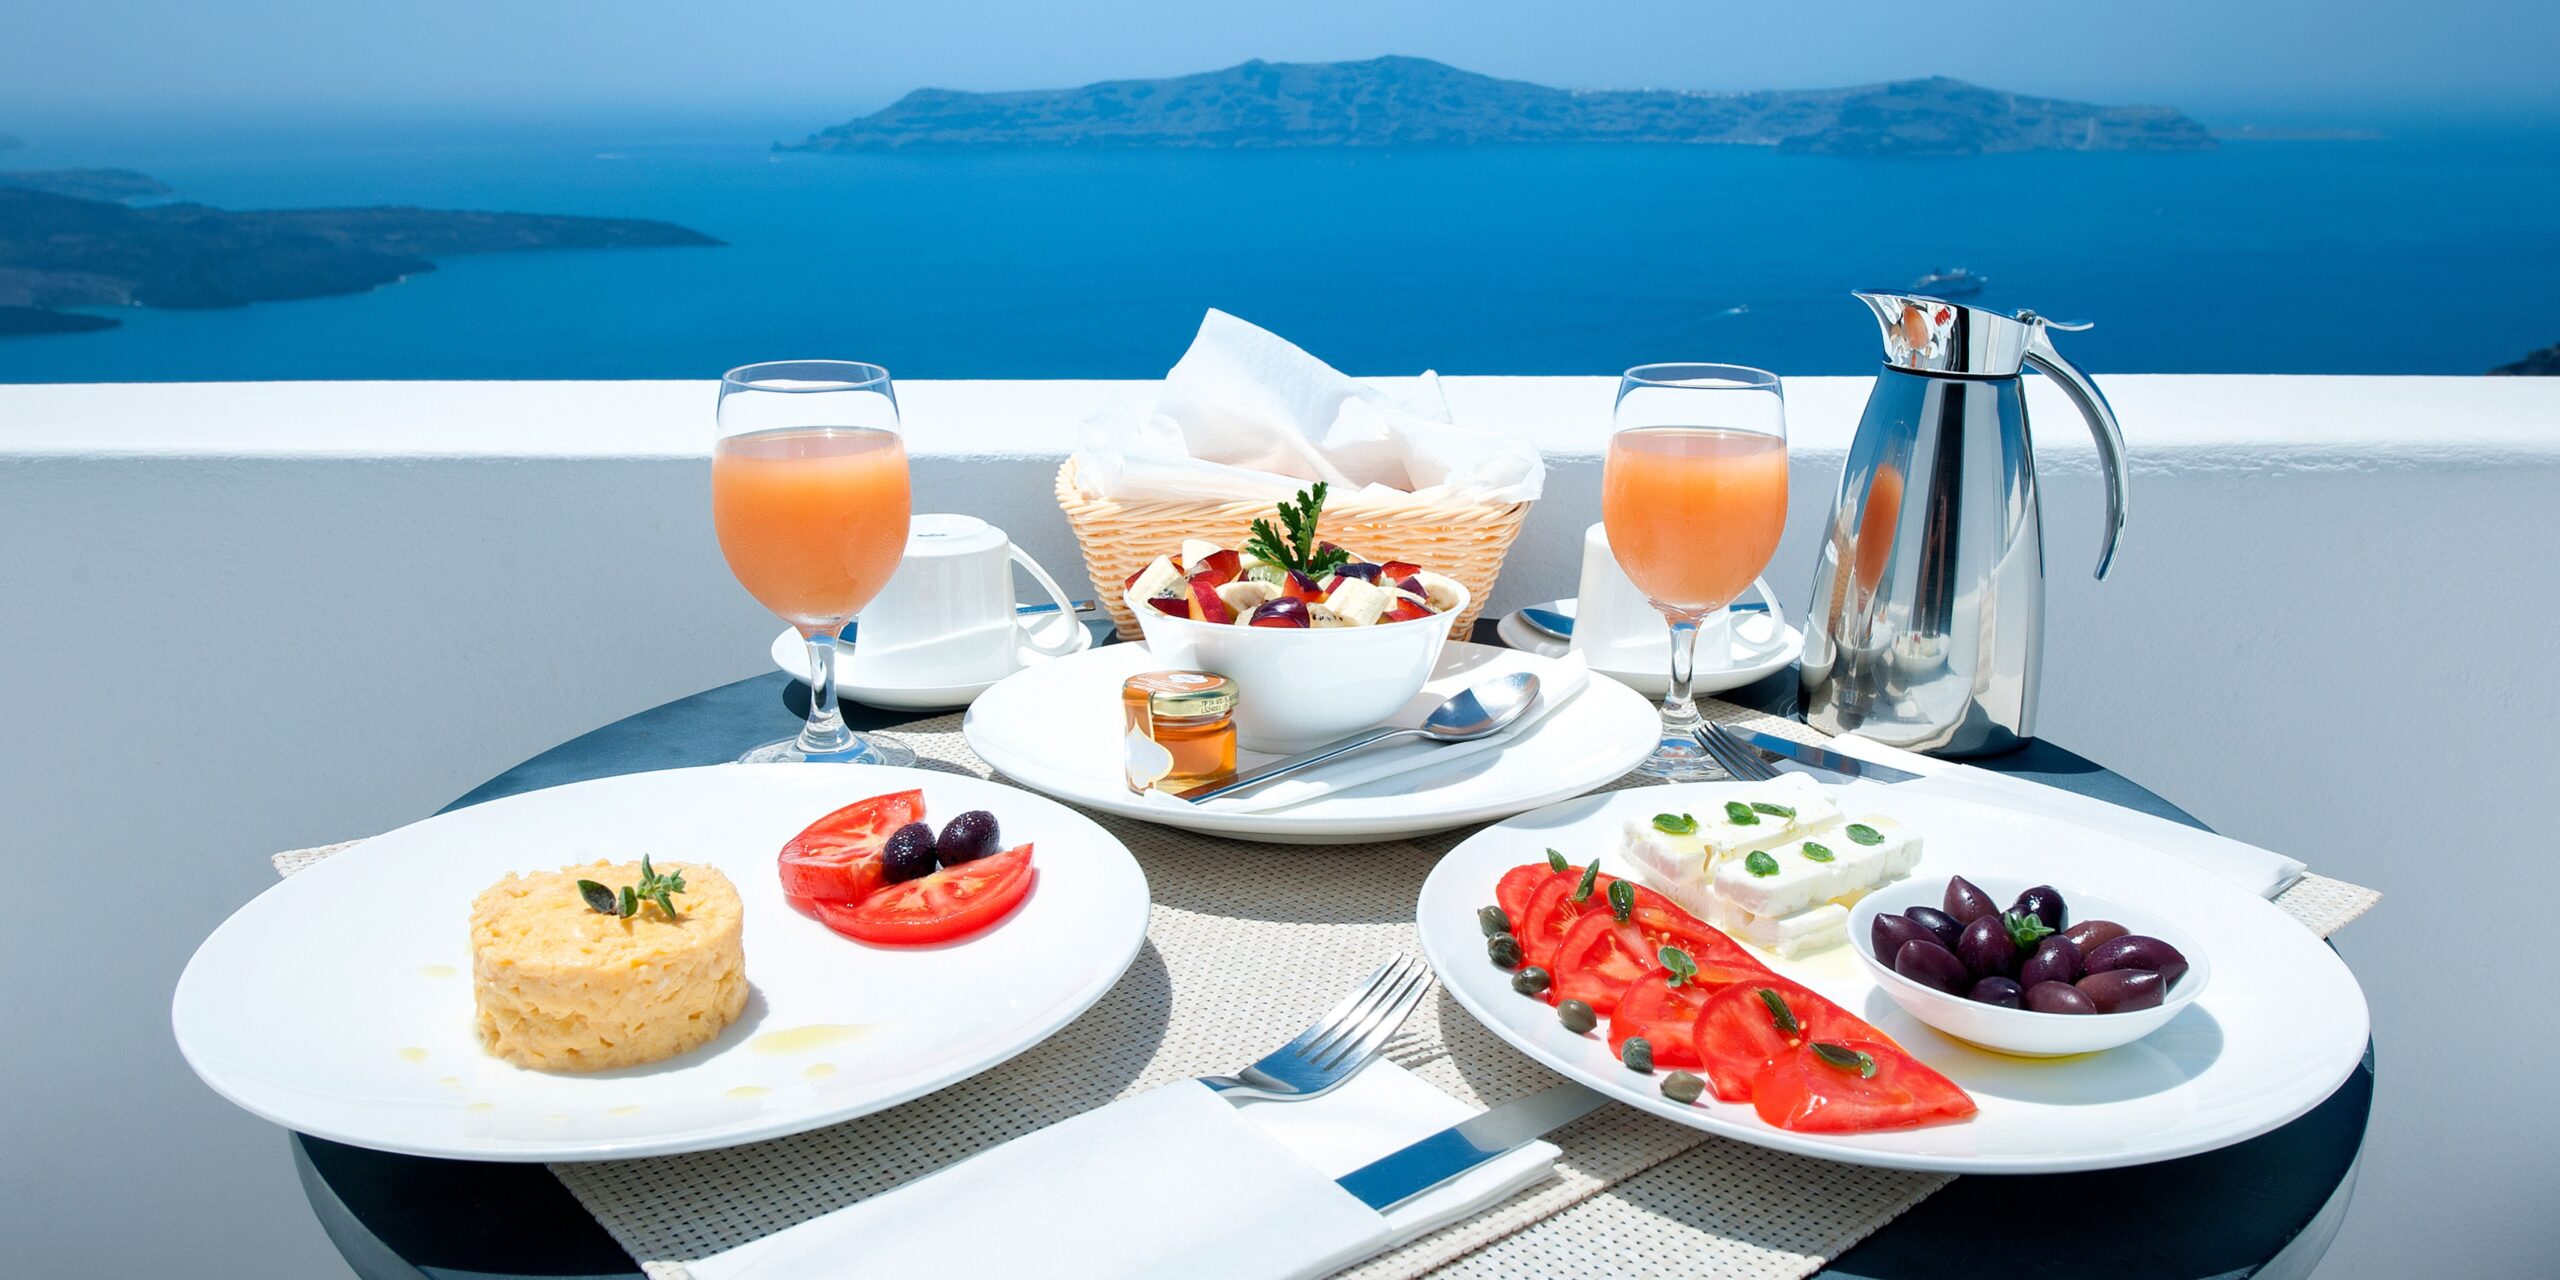 dishe with greek food on plates on a white table overlooking the agean sea